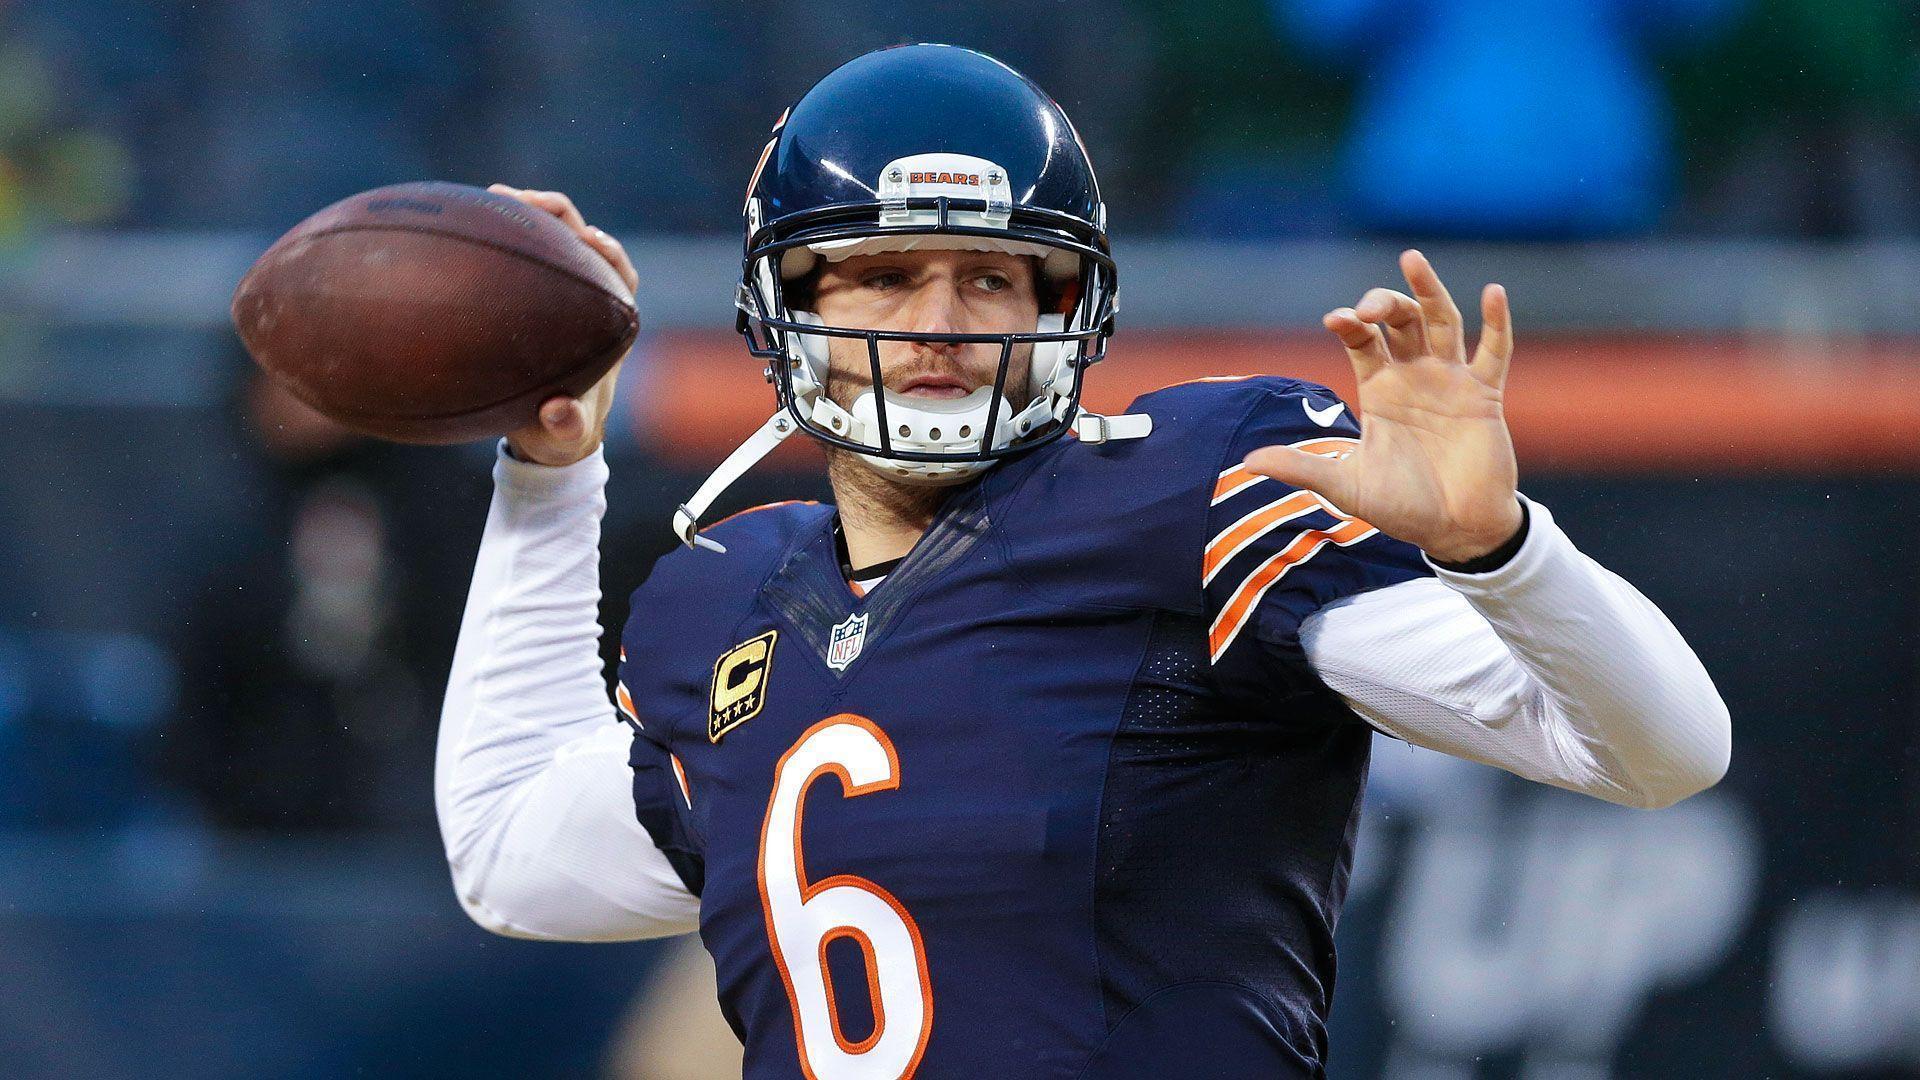 Jay Cutler wants to play for Bears, but will they keep him?. NFL